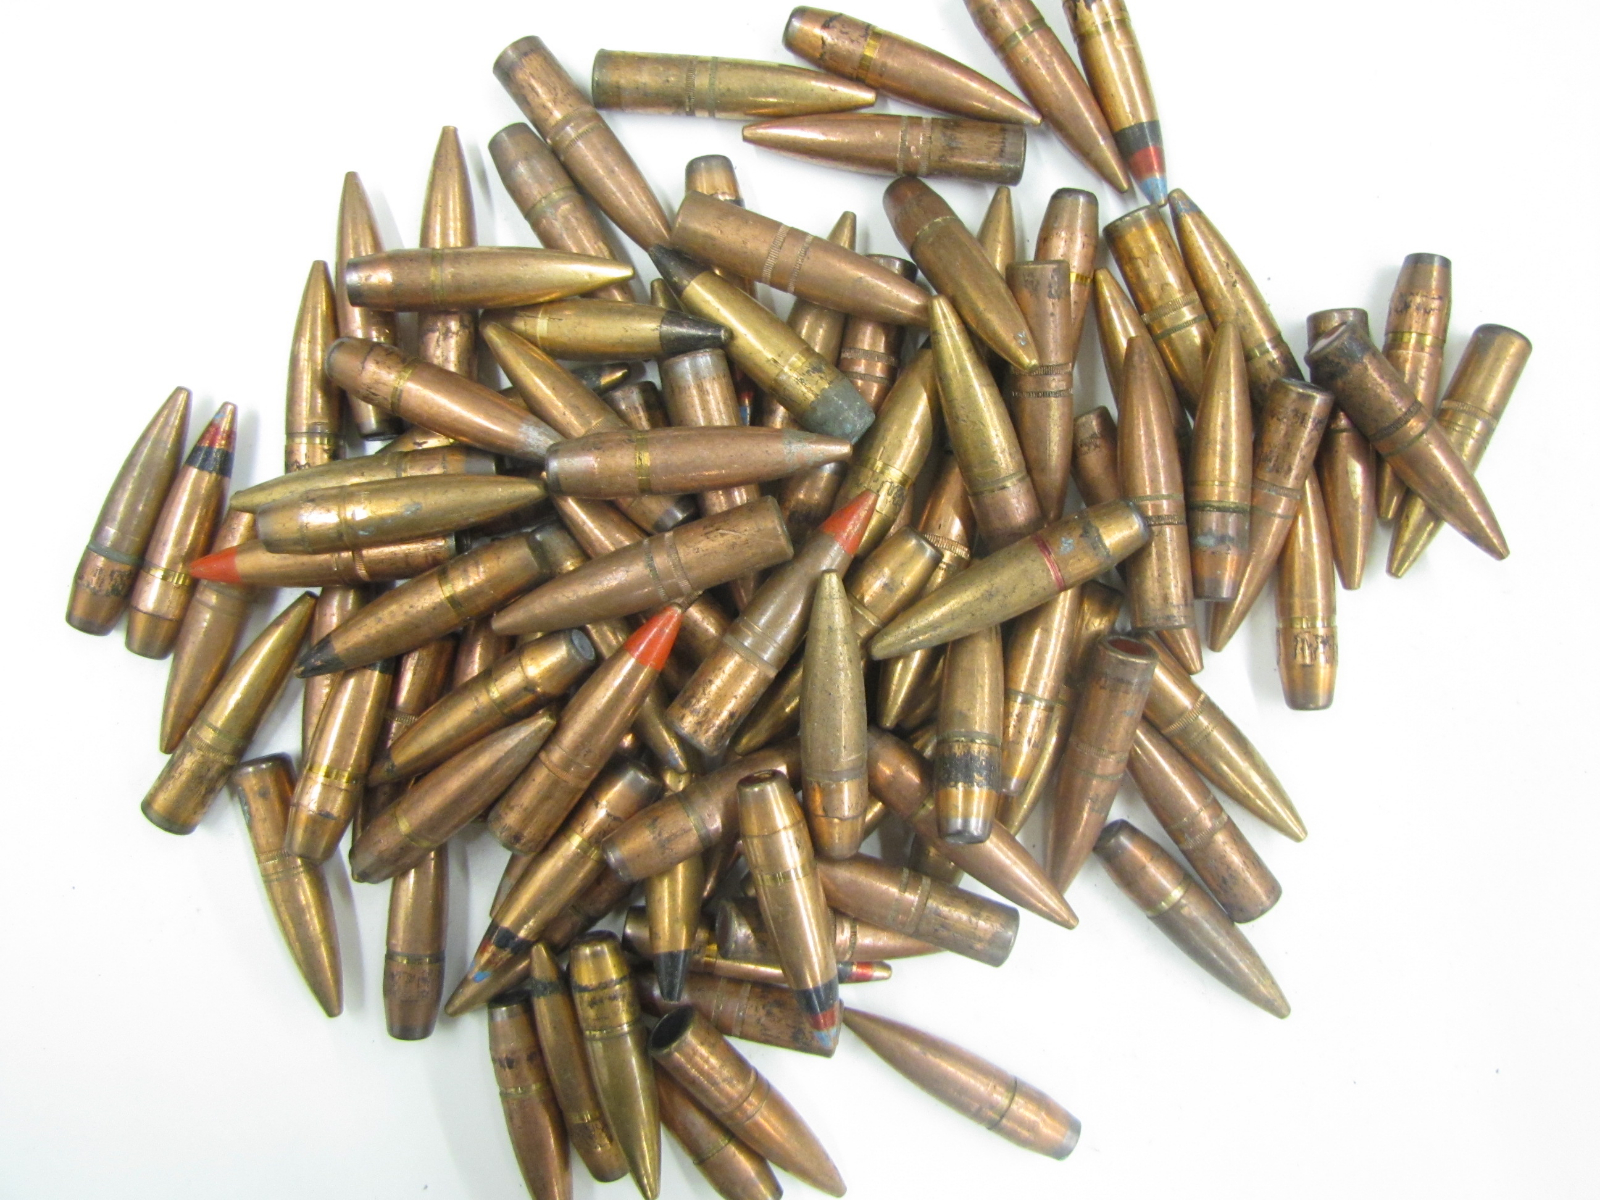 50 BMG 647gr Pulled Projectiles - Once Fired Brass